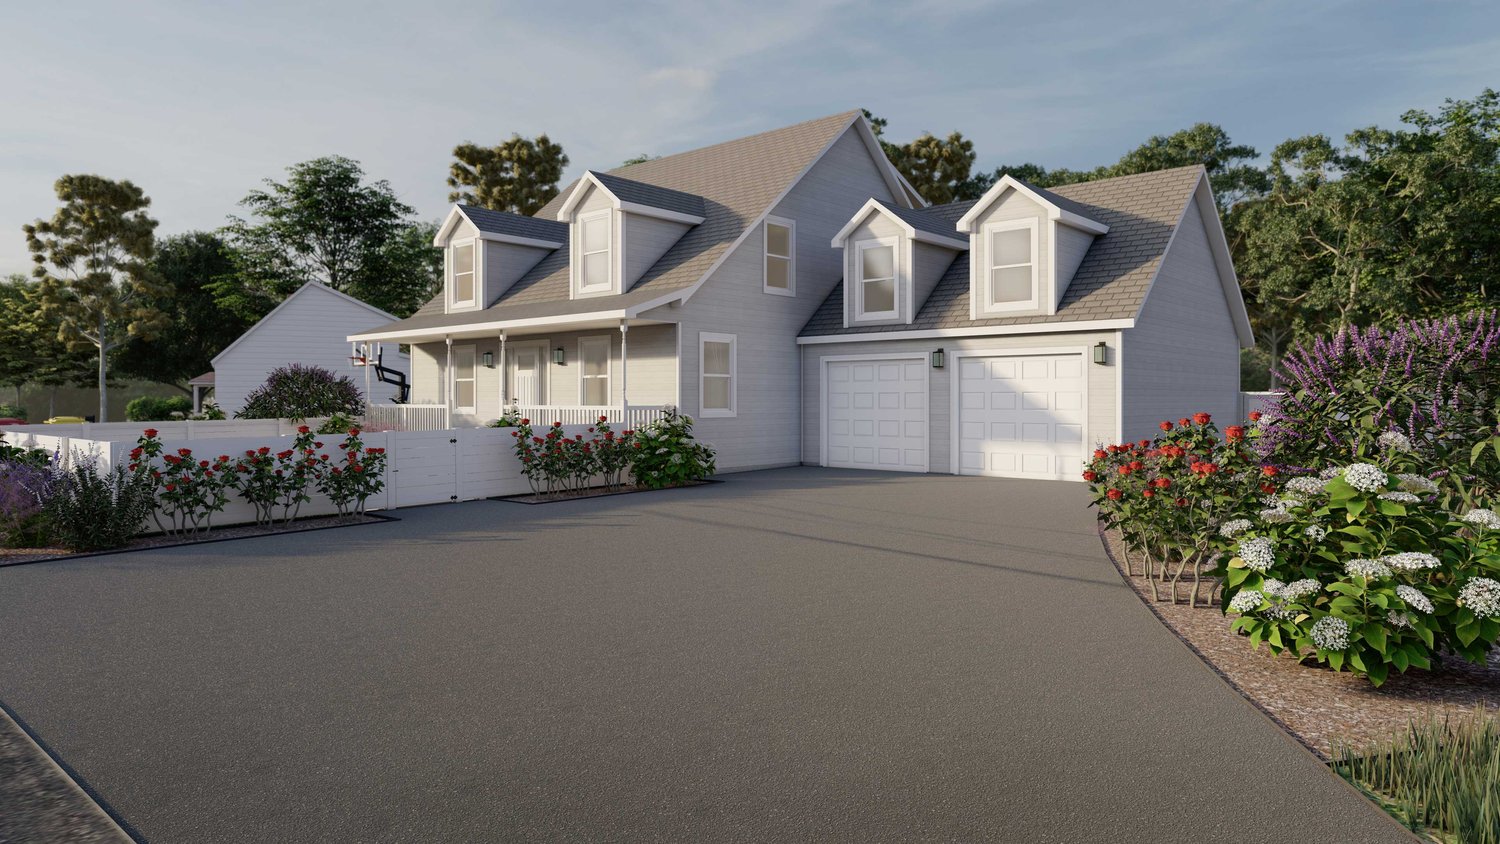 Long Island front yard with concrete driveway and garden sections